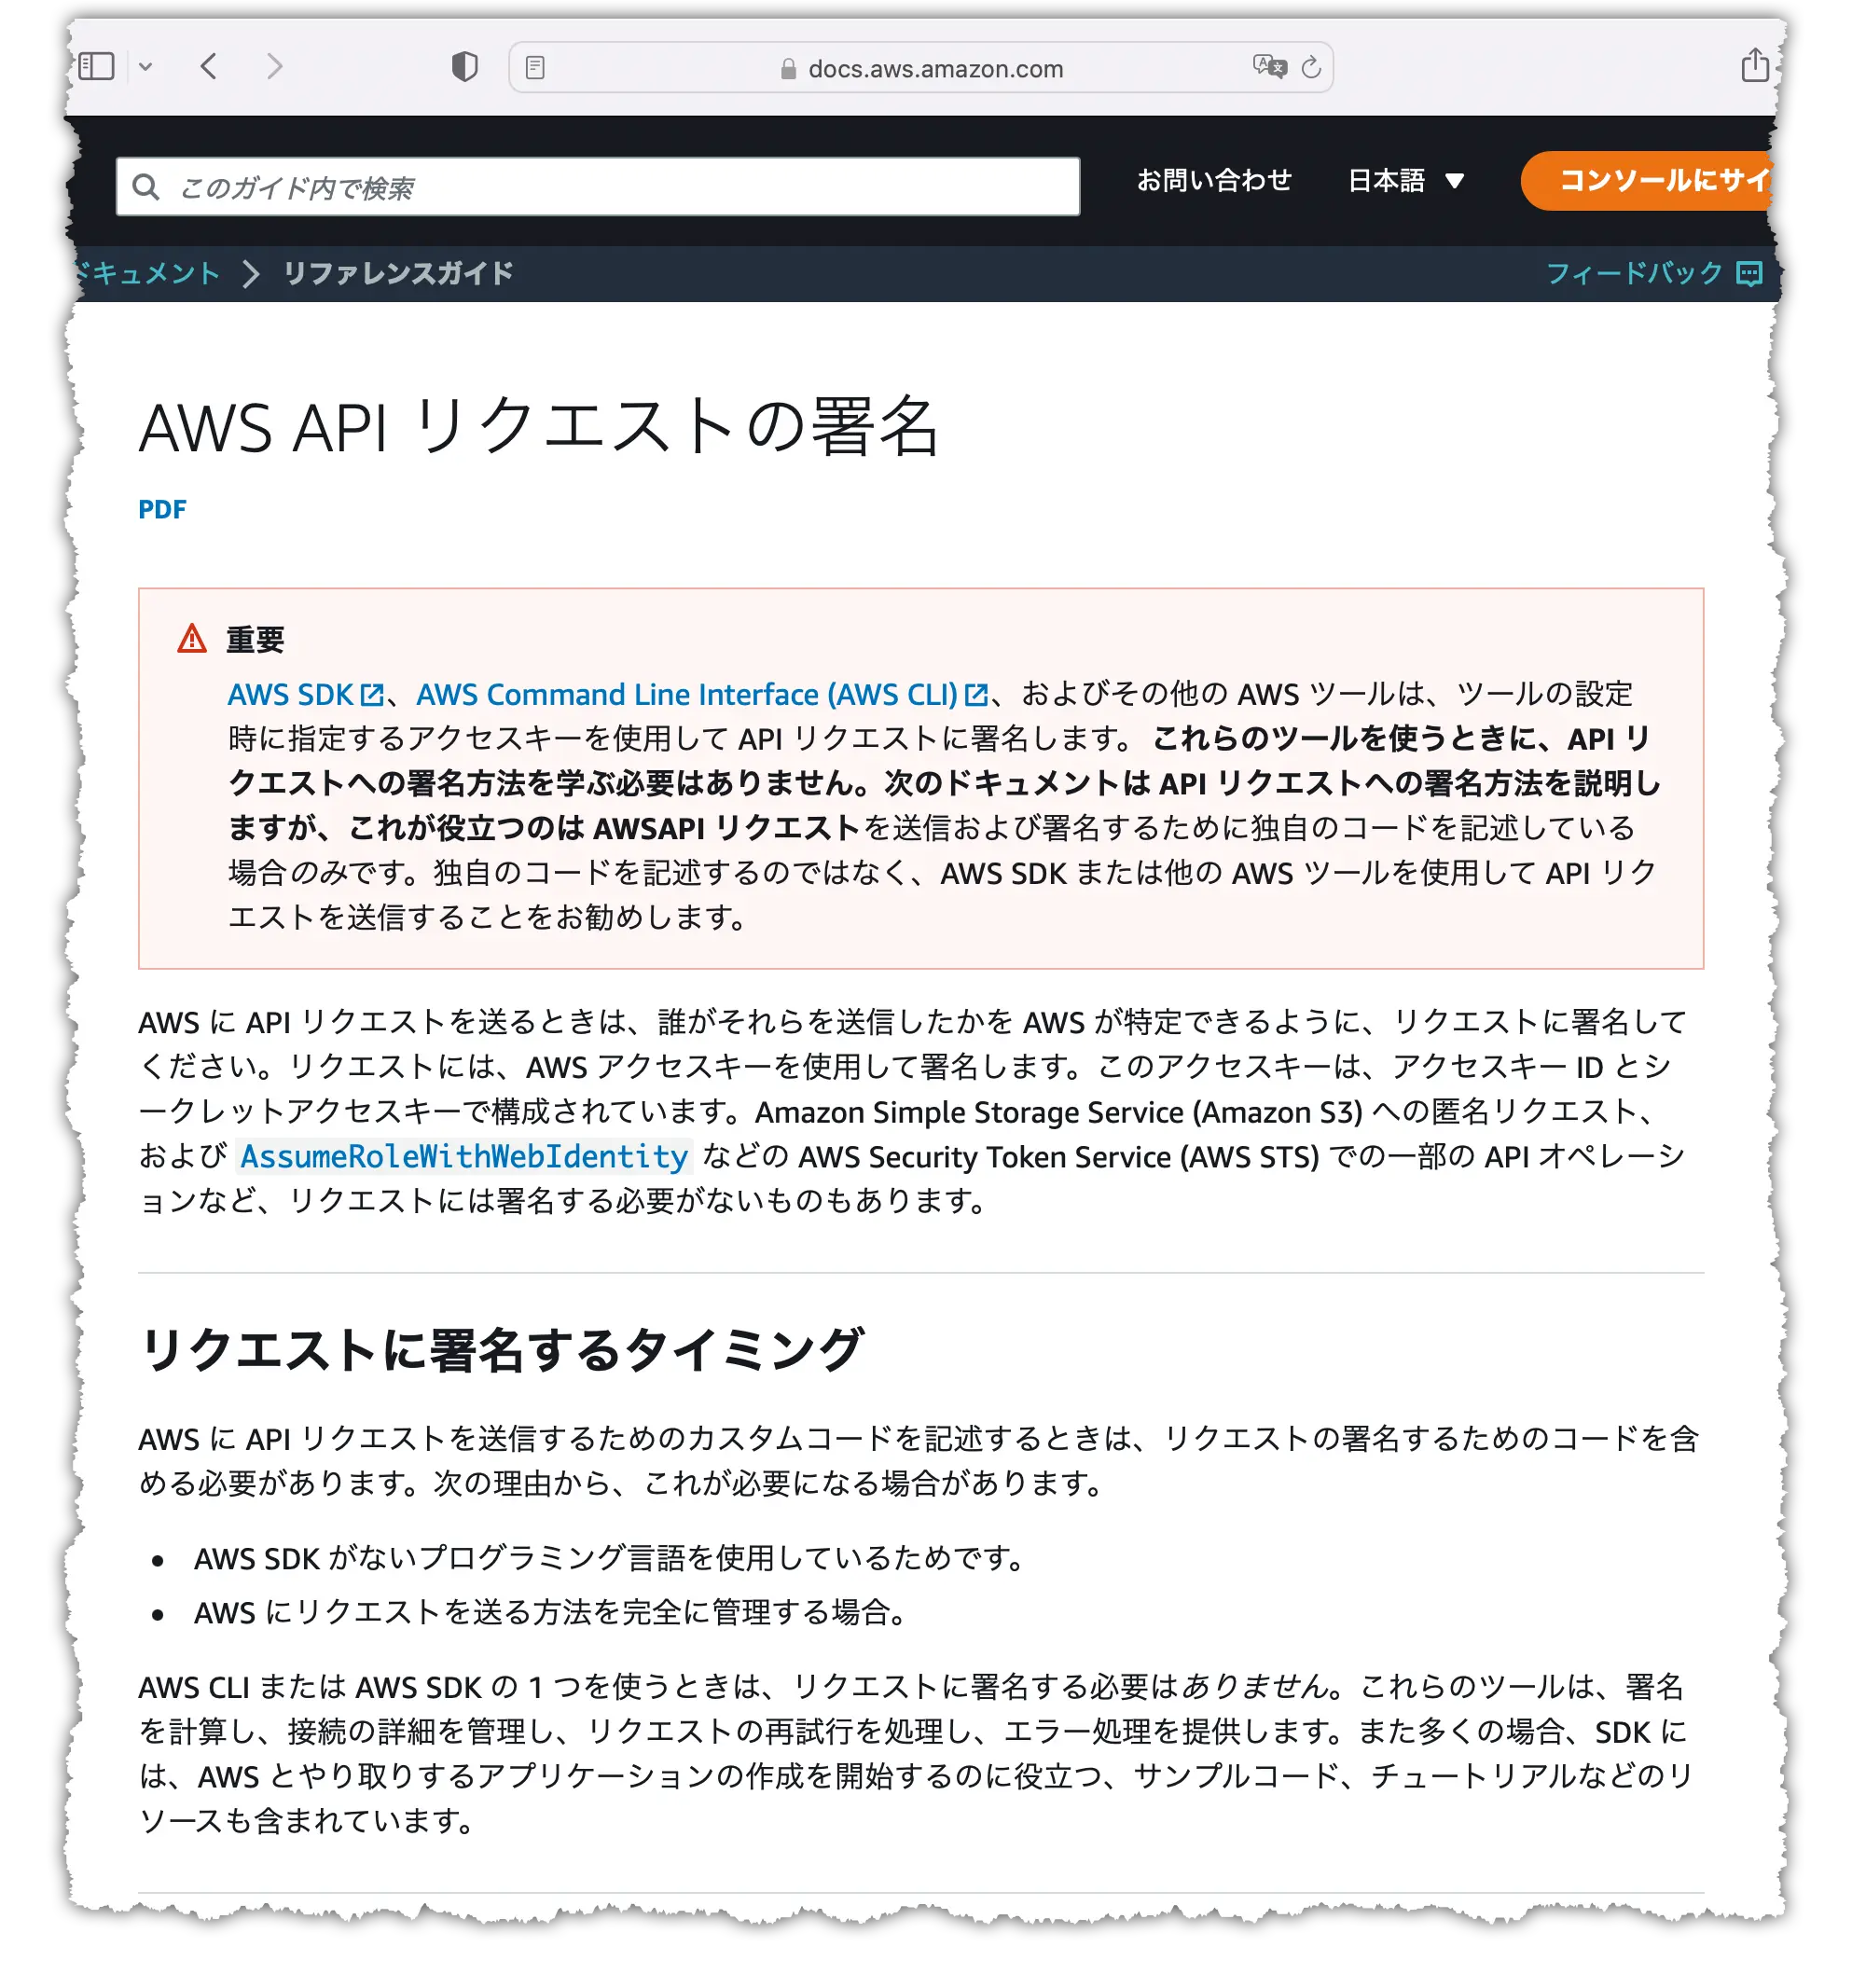 how-to-use-aws-apis-s3-ec2-from-filemaker-34